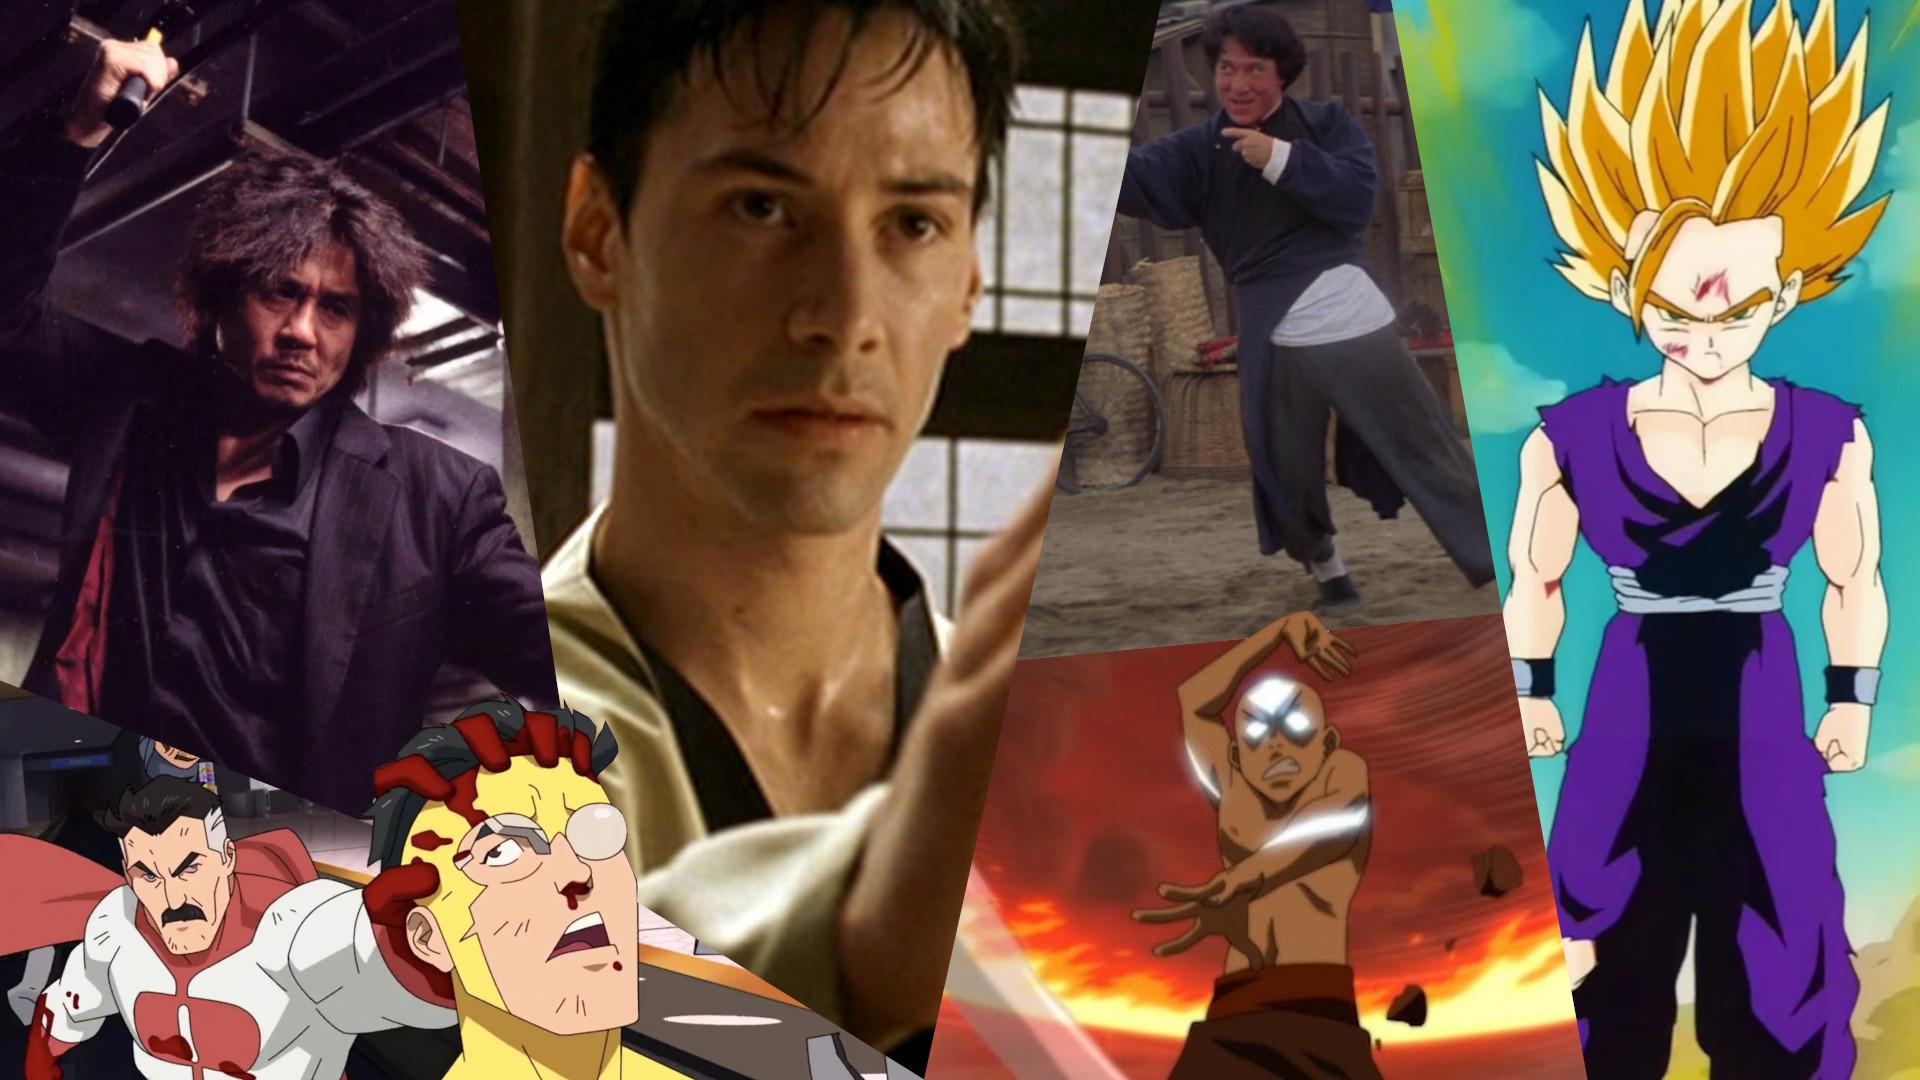 A collage of teh best fight scenes in movies which includes Omni-Man versus Mark, Neo, Oh Dae su, Aang, Jackie Chan, and Gohan